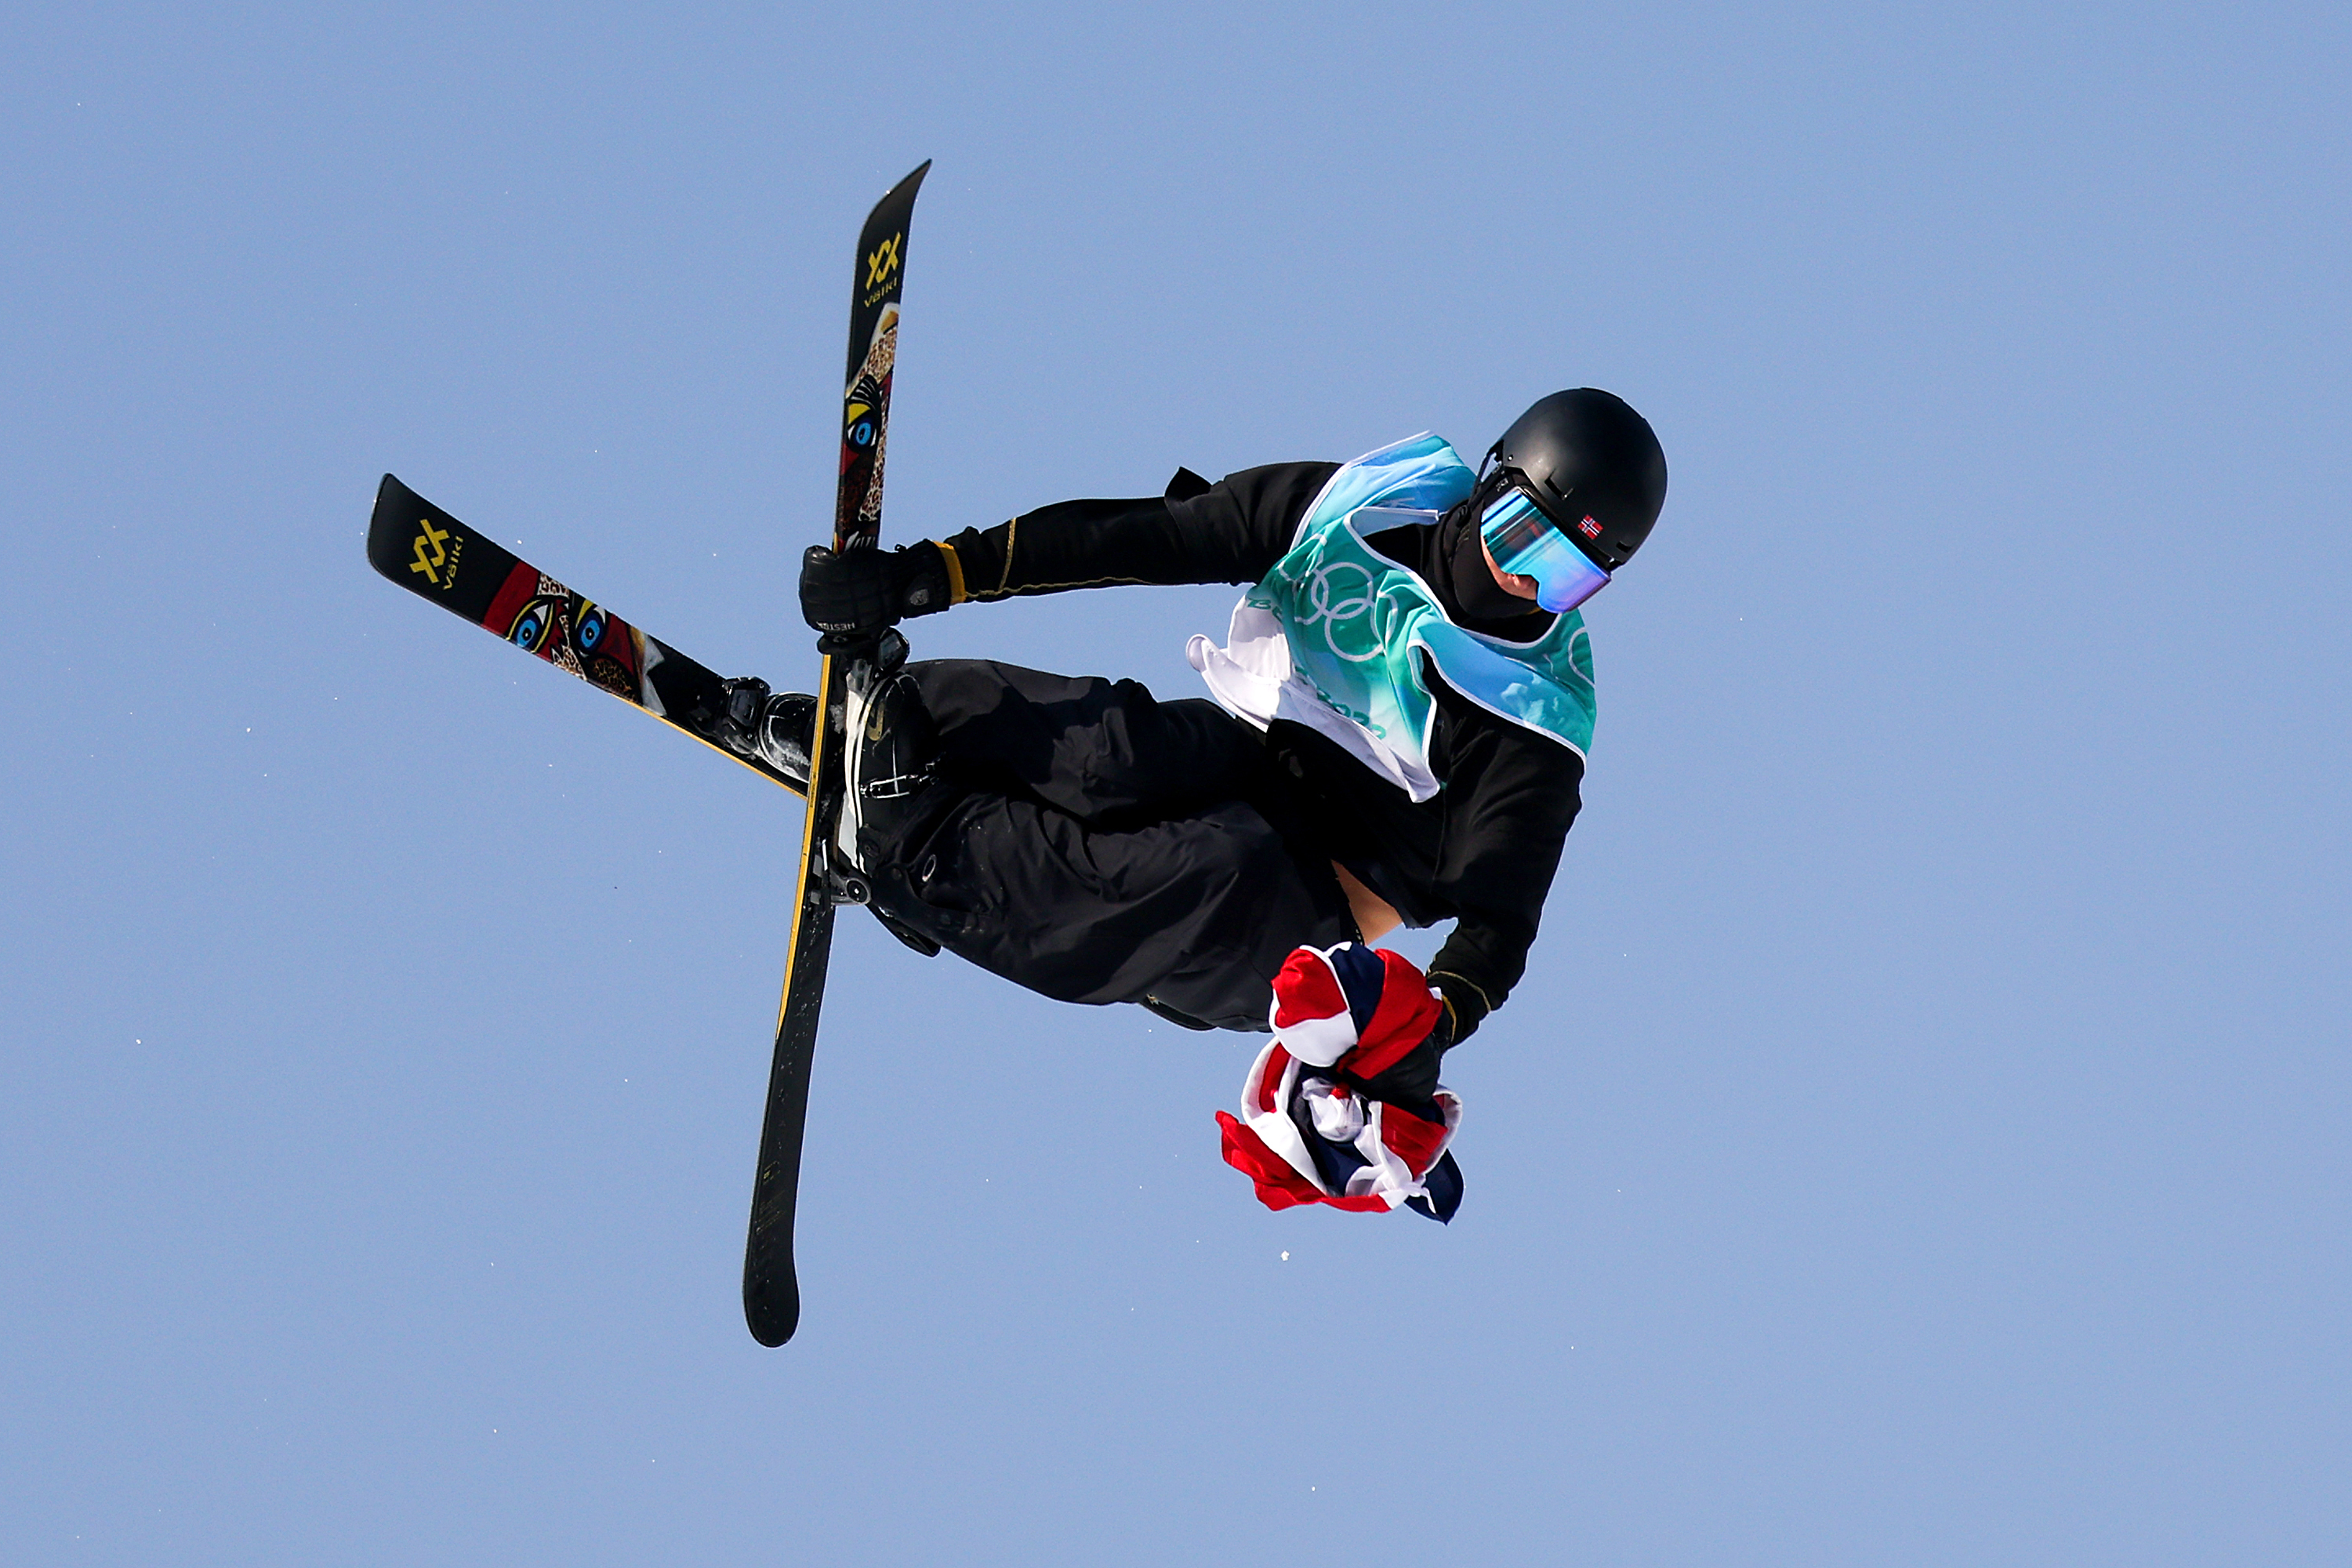 Norway's Birk Ruud performs a trick during the men's freestyle skiing freeski big air final with the Norwegian flag in his hand on Wednesday.